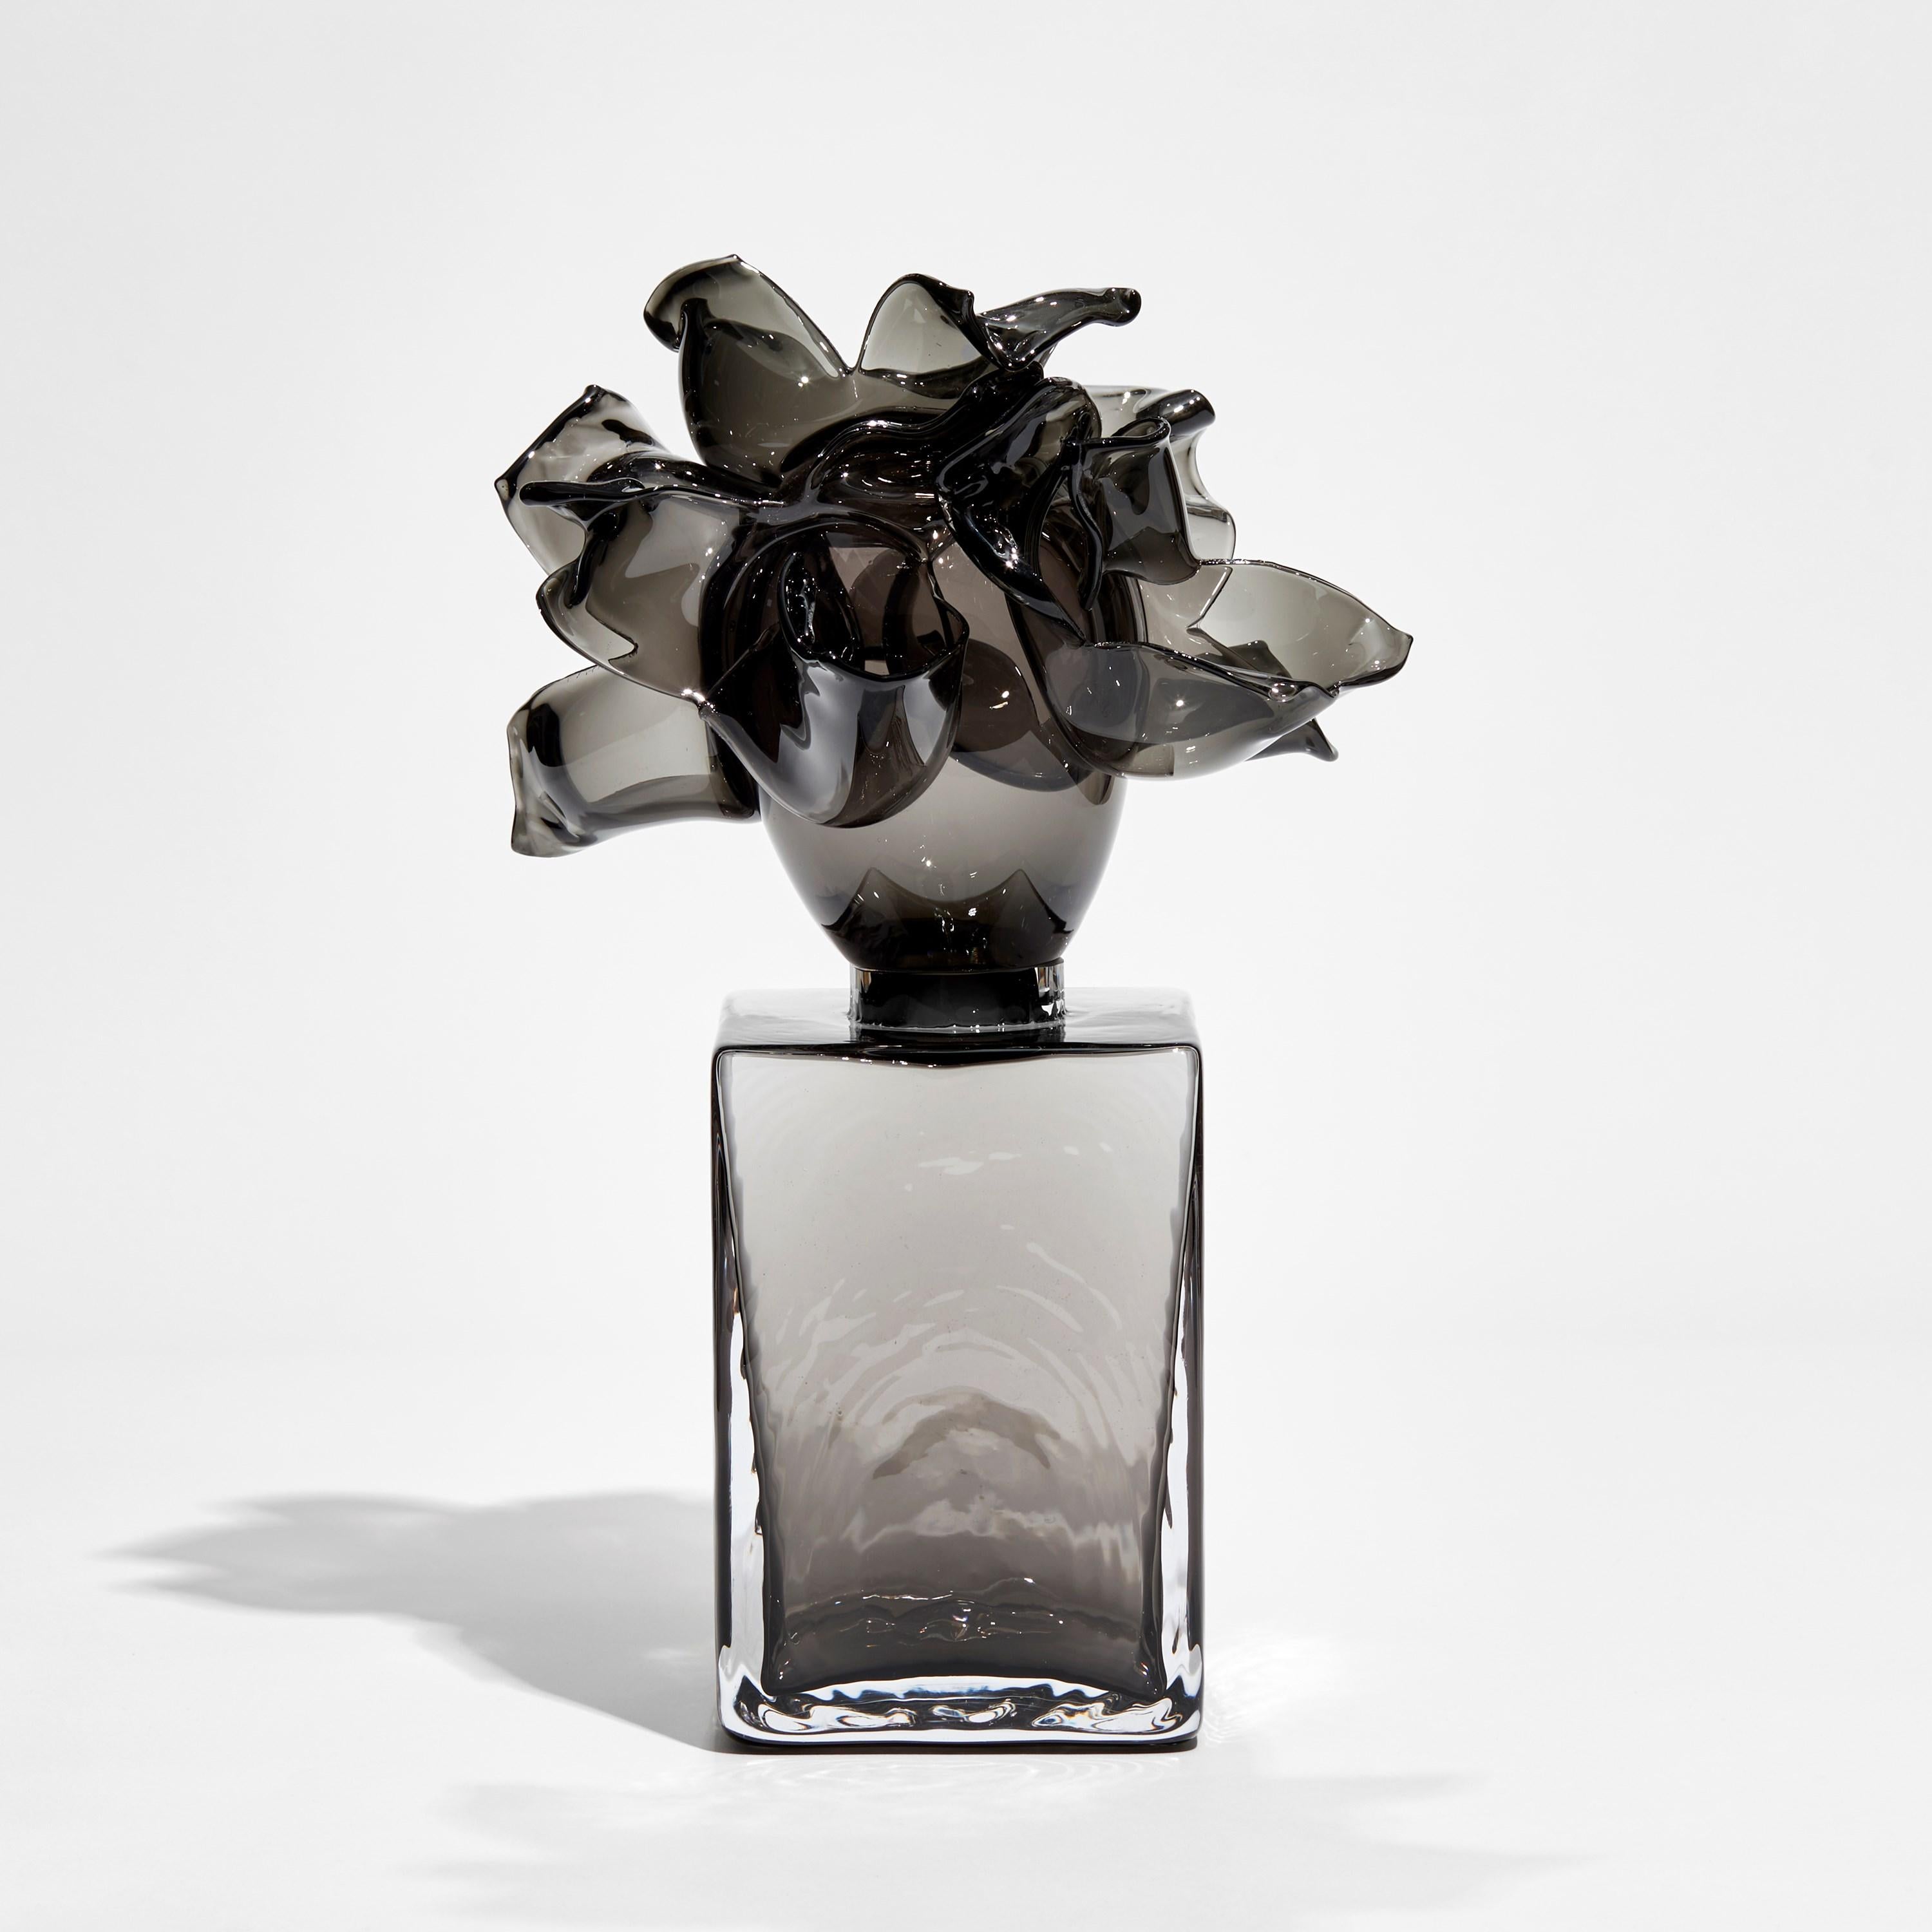 'Anemone in Grey' is a limited edition artwork by the Swedish artist and designer, Lena Bergström.

Created for 'Lena 25+', Bergström's 2022 solo exhibition celebrating the 25 years and more for which she has been designing glass for the boutique